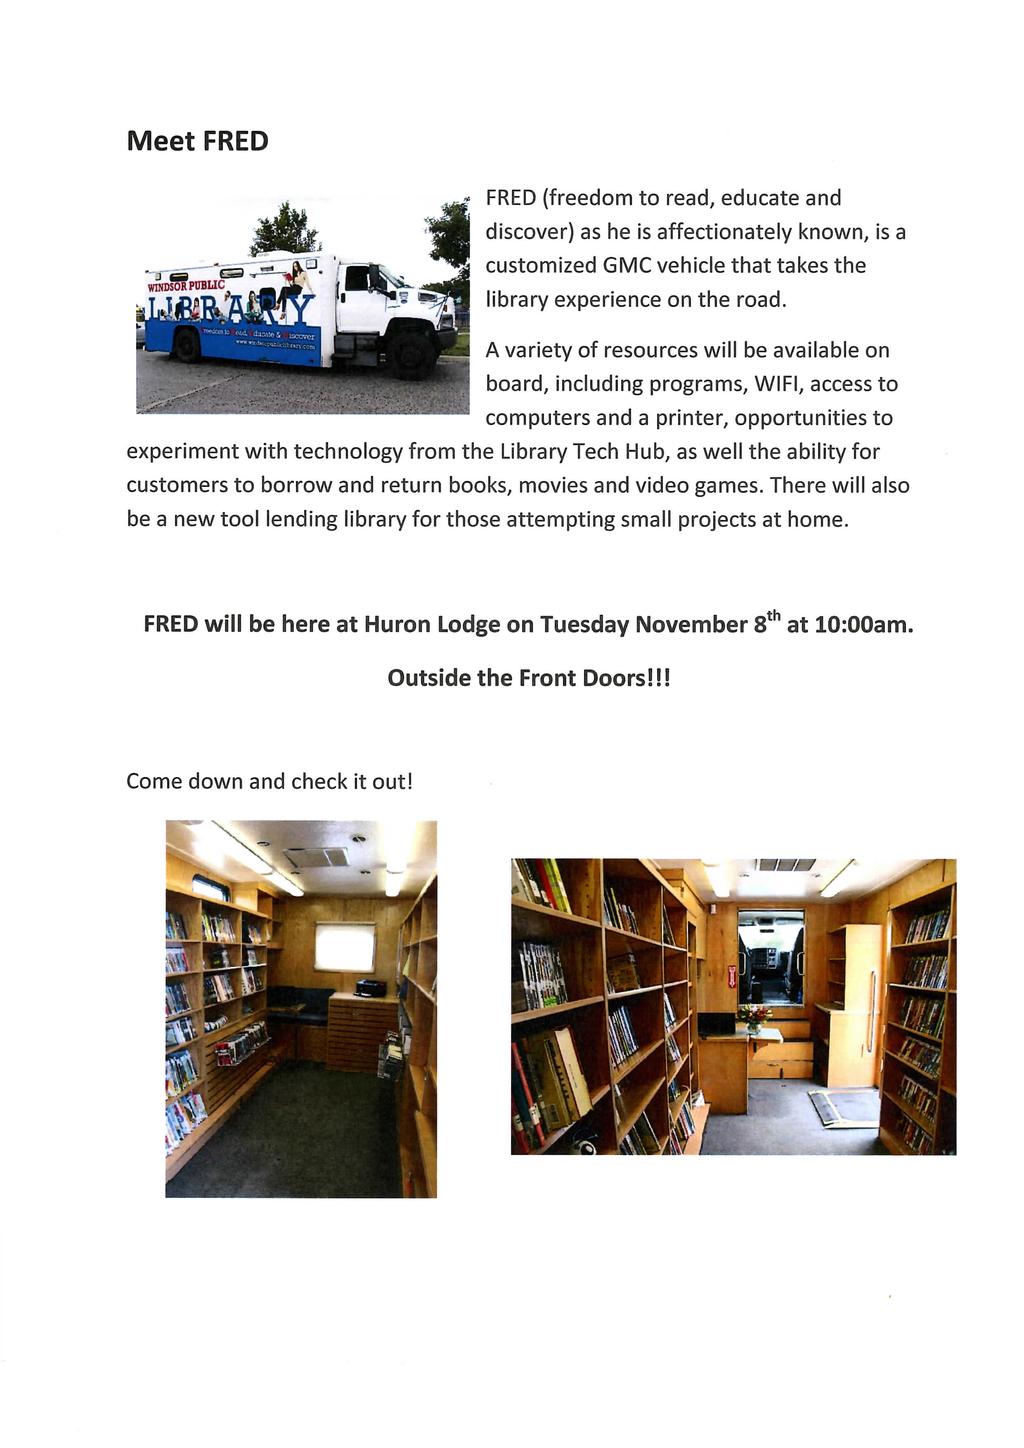 Meet FRED FRED (freedom to read, educate and discover) as he is affectionately known, is a customized CMC vehicle that takes the library experience on the road.